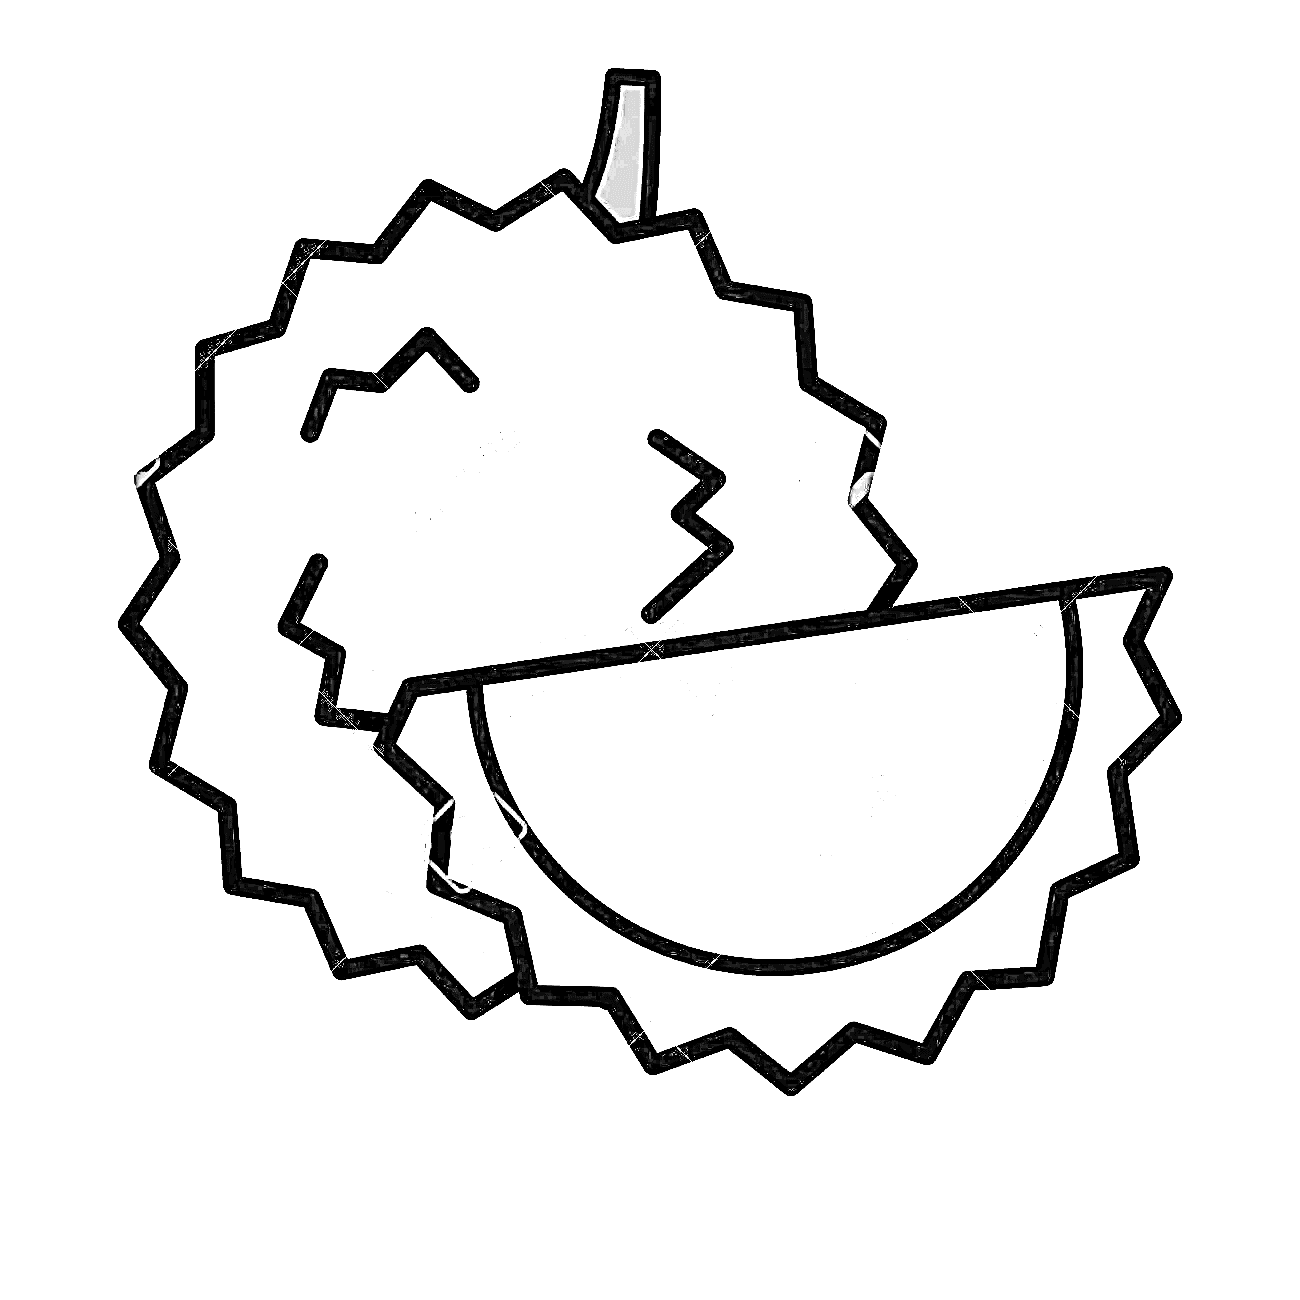 Durian vector illustration isolated